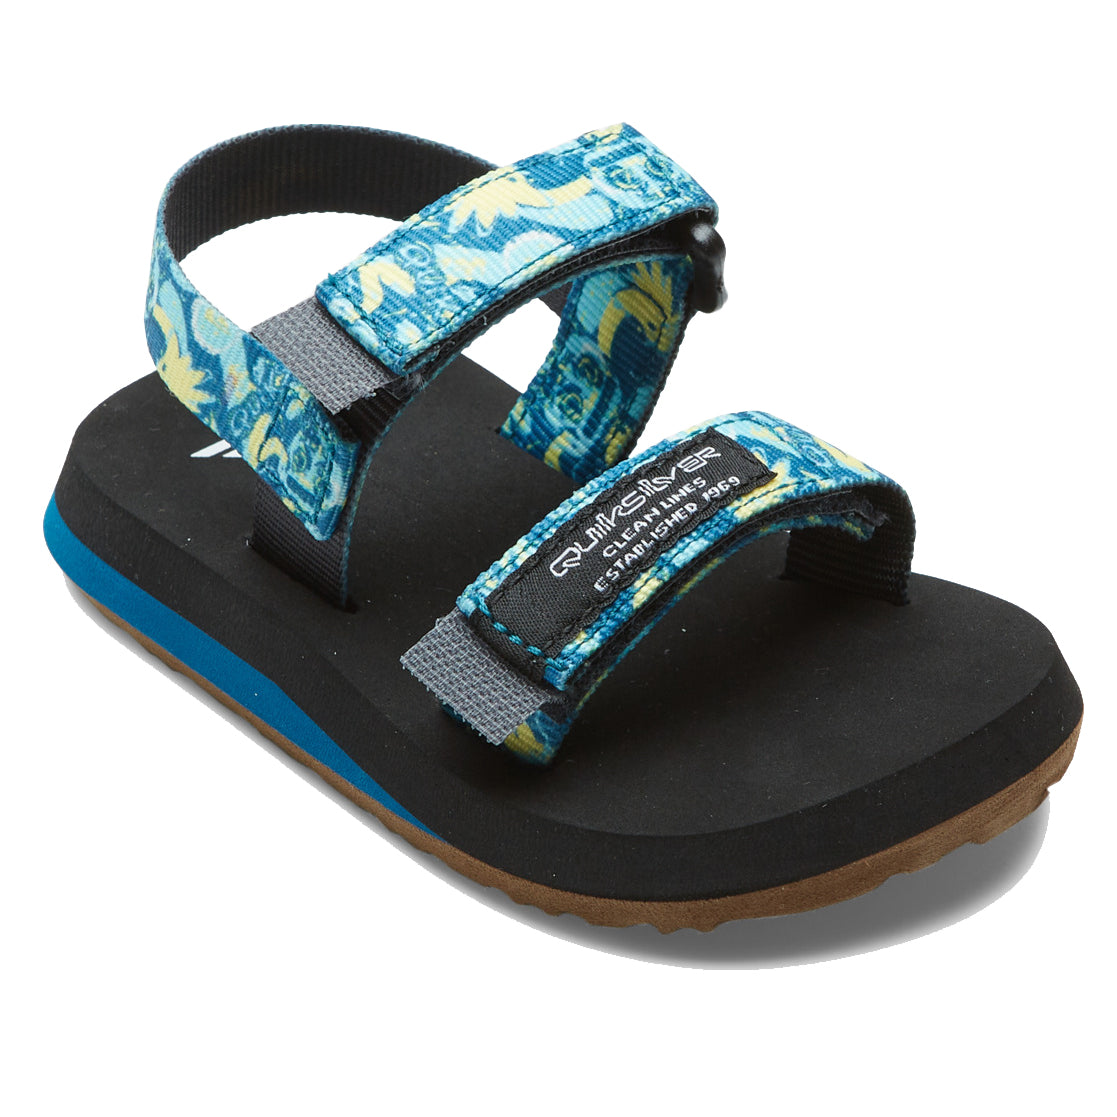 Quiksilver Monkey Caged Toddler Sandal XBBY 4 C